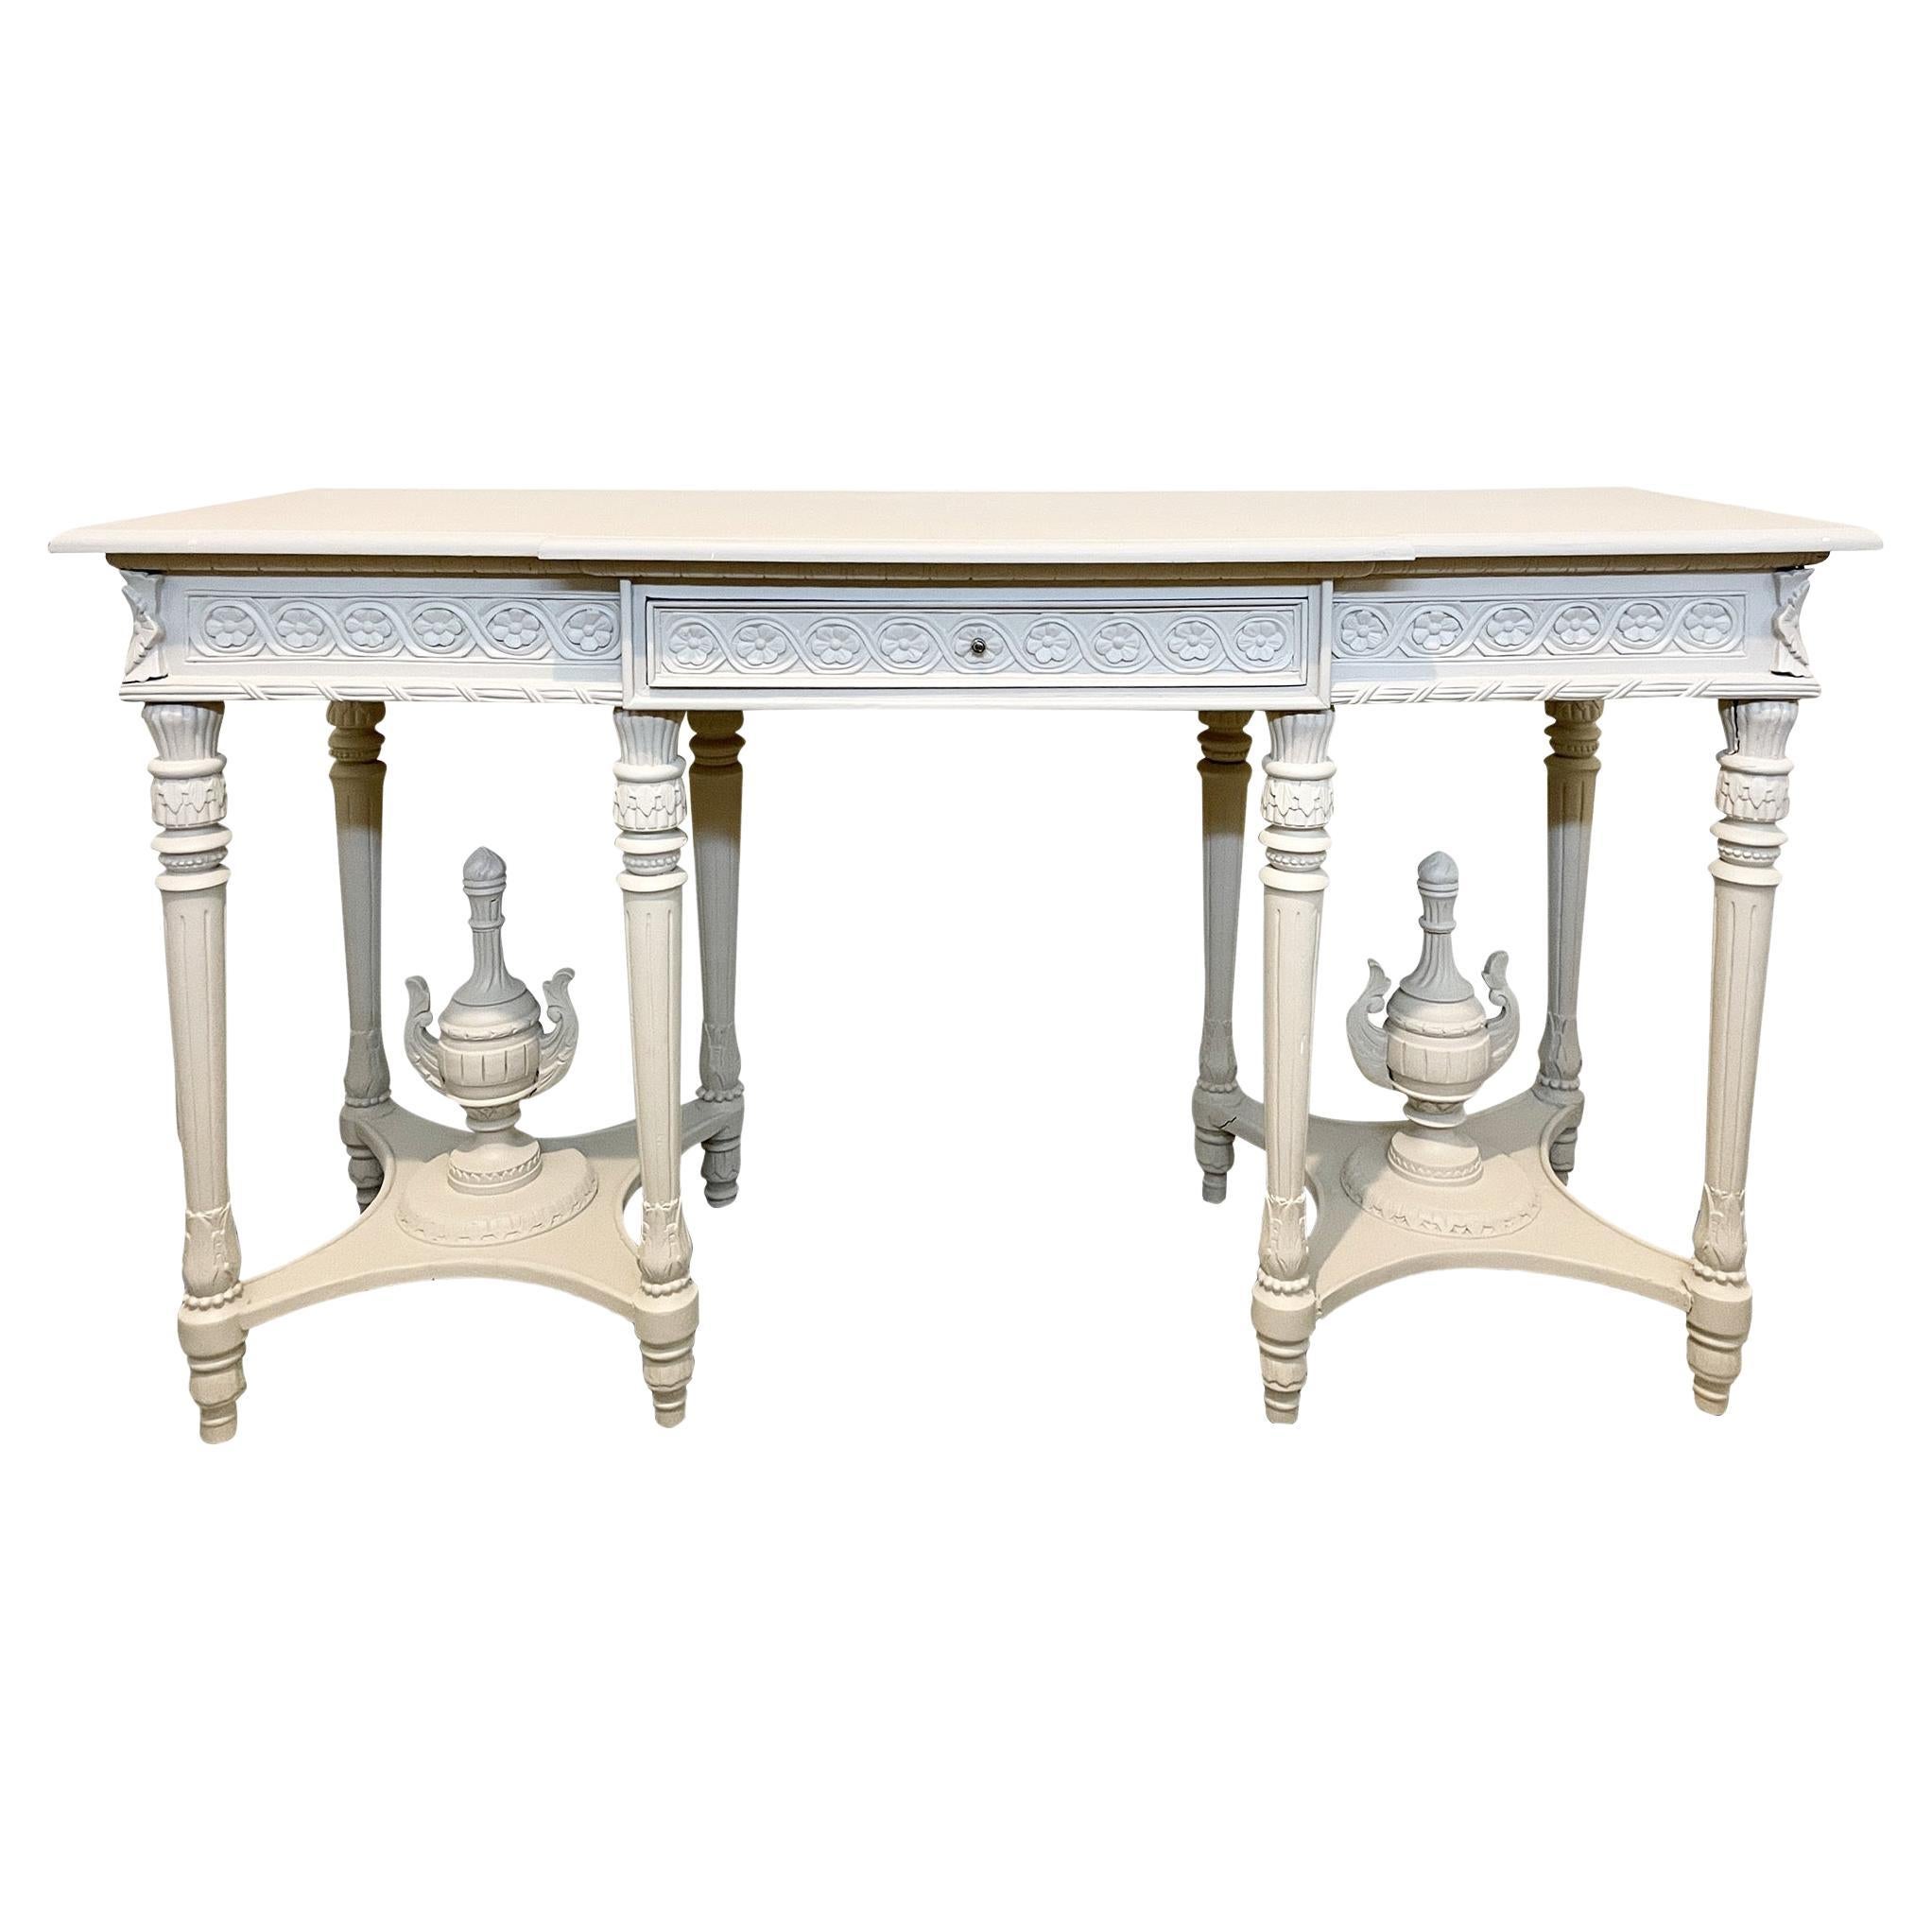 French Classical Console in Gray Painted Finish with Drawer